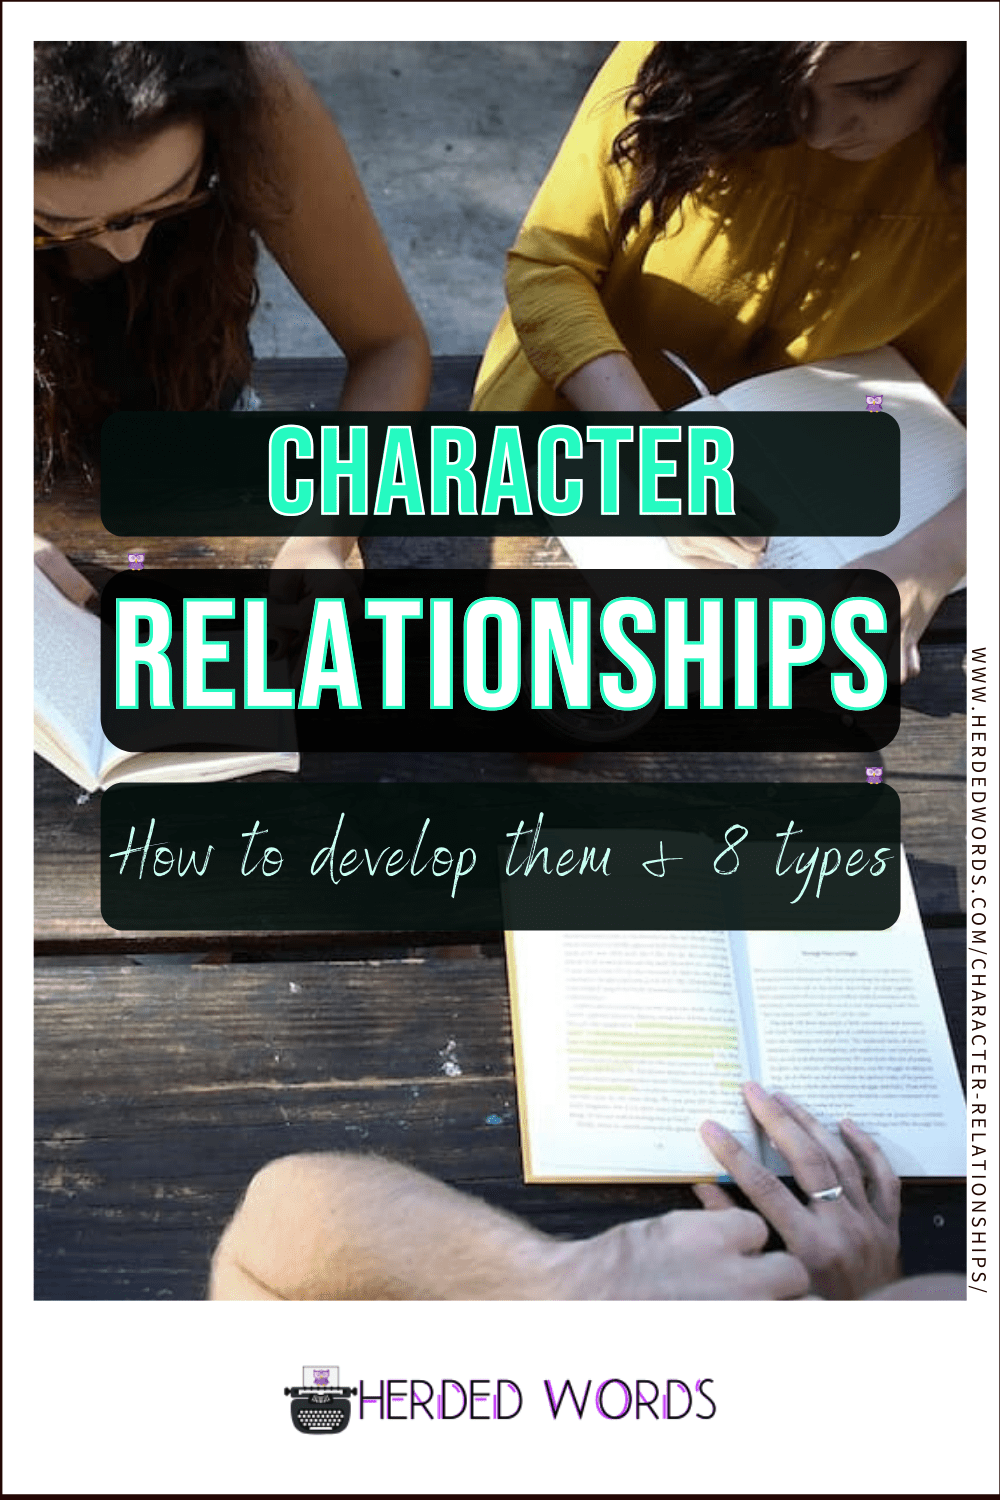 Image link to character relationships (how to develop them & 8 types)